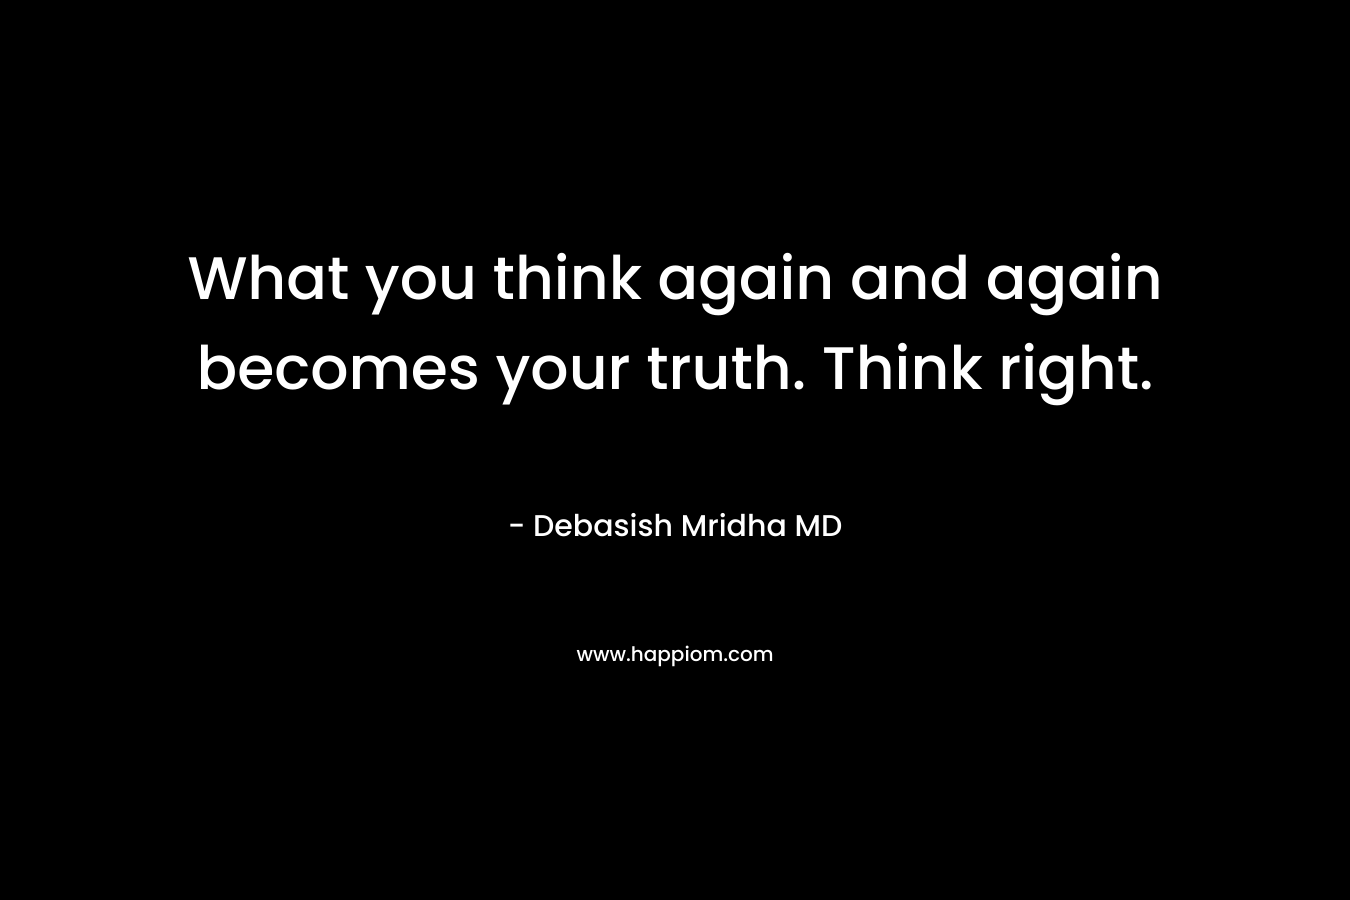 What you think again and again becomes your truth. Think right.